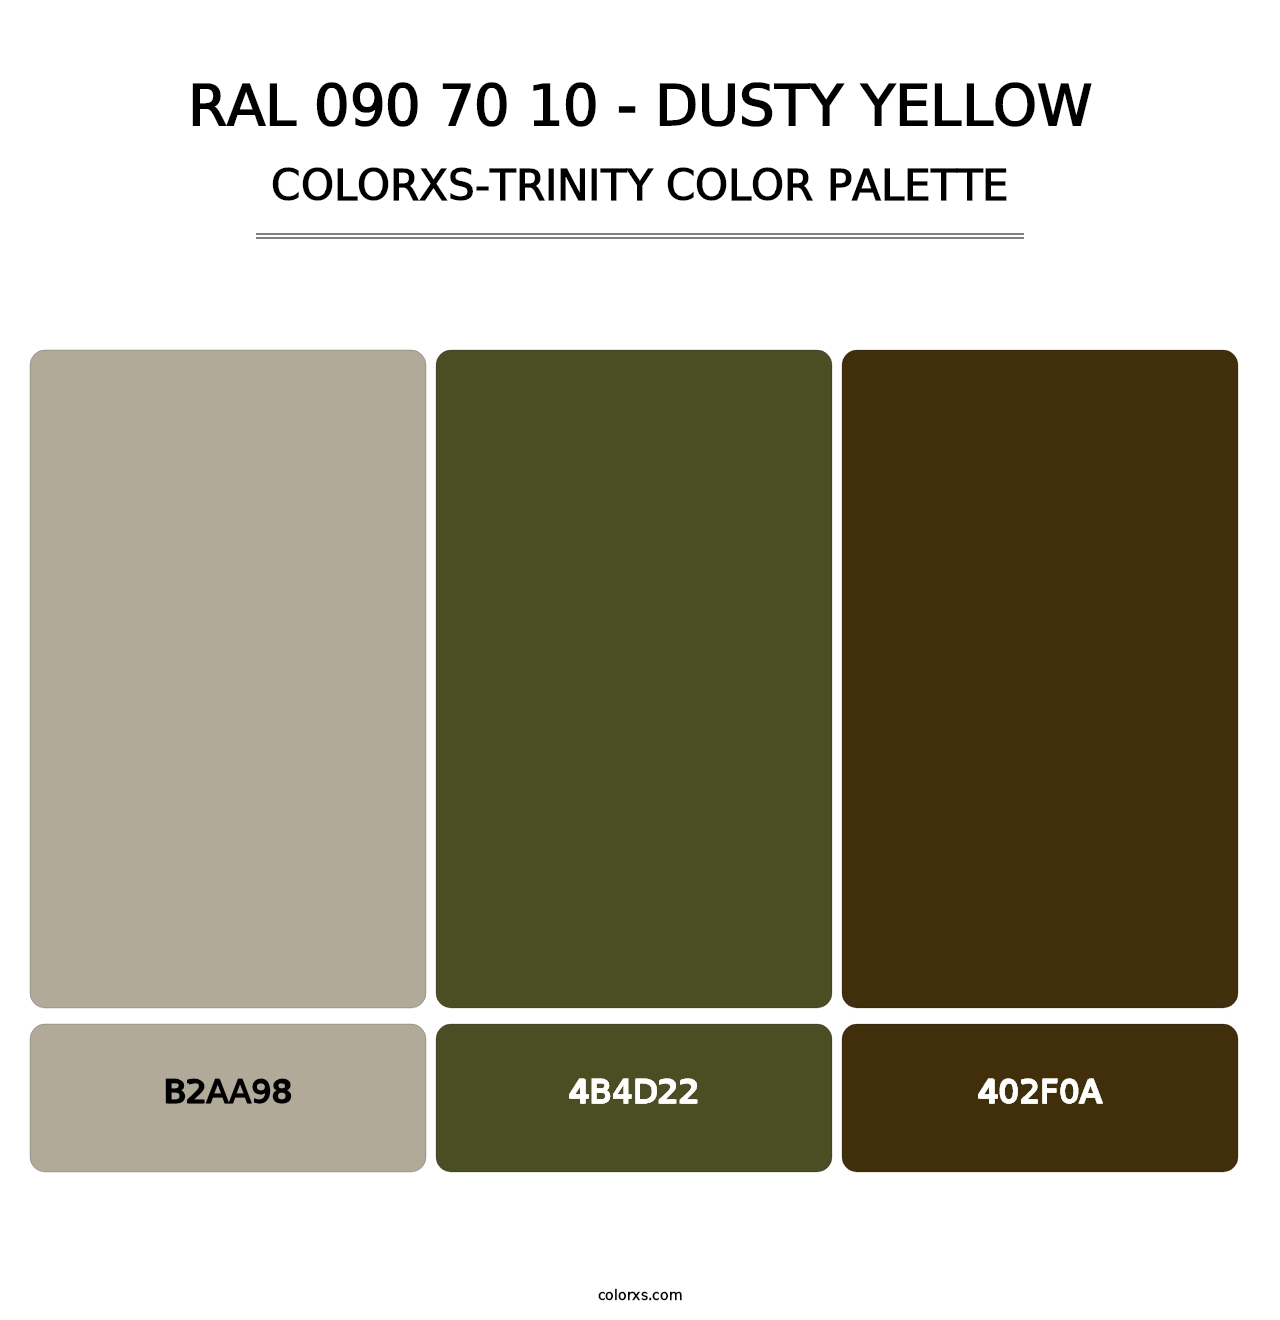 RAL 090 70 10 - Dusty Yellow - Colorxs Trinity Palette